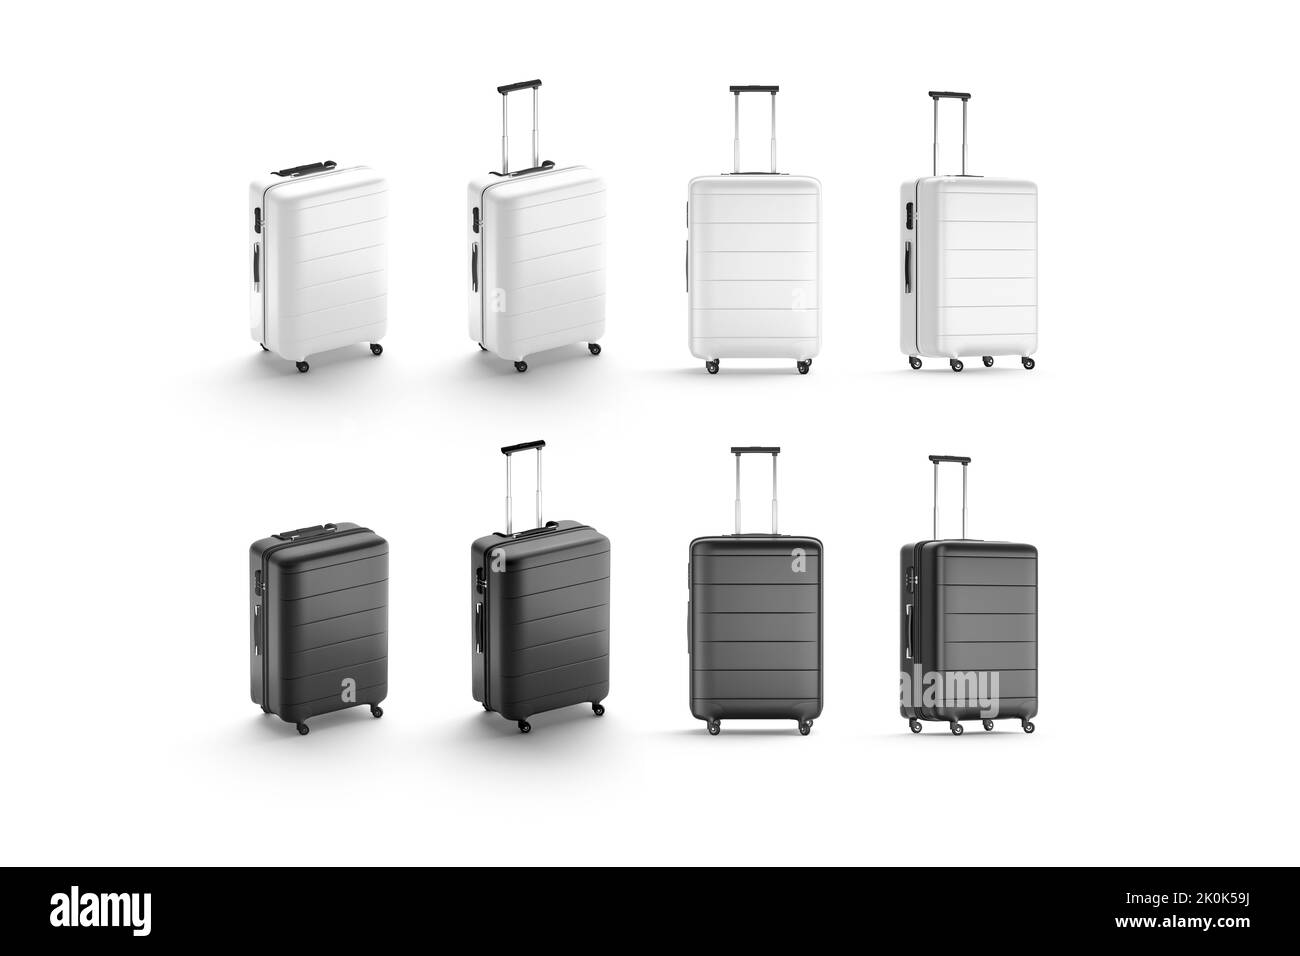 Blank black and white suitcase mockup stand, different views Stock Photo